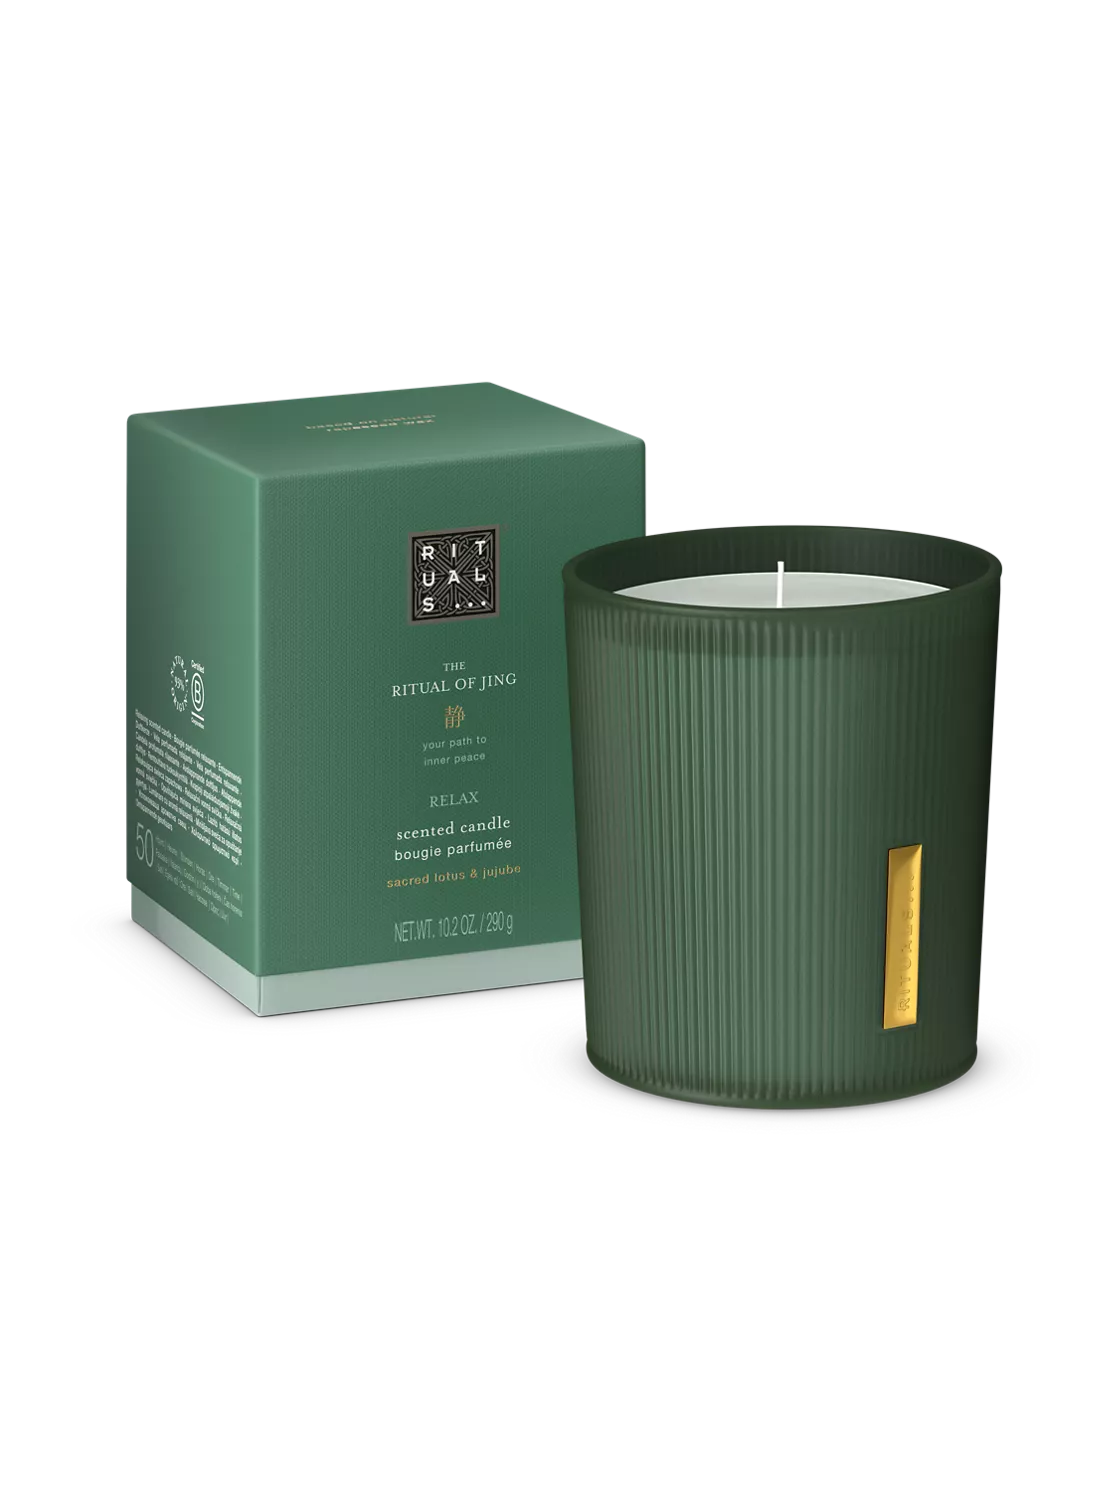 RITUALS® Jing - Scented candle